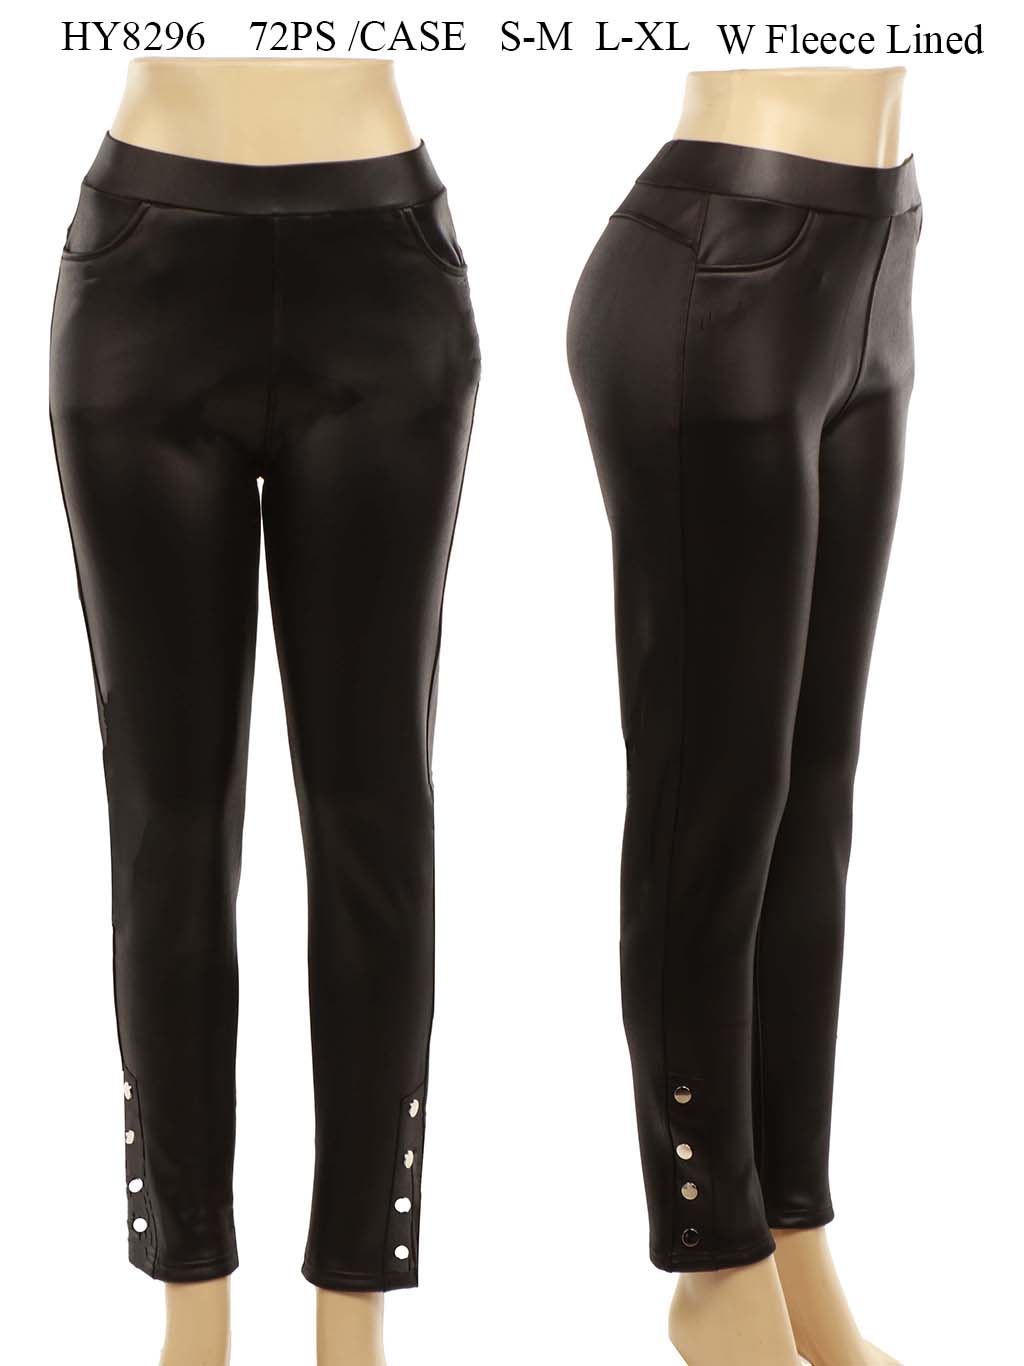 Women's Fleece Lined Leather Pants With Pockets One Dozen Wholesale Size:  S-M, L-XL - Nali Collection, Inc.